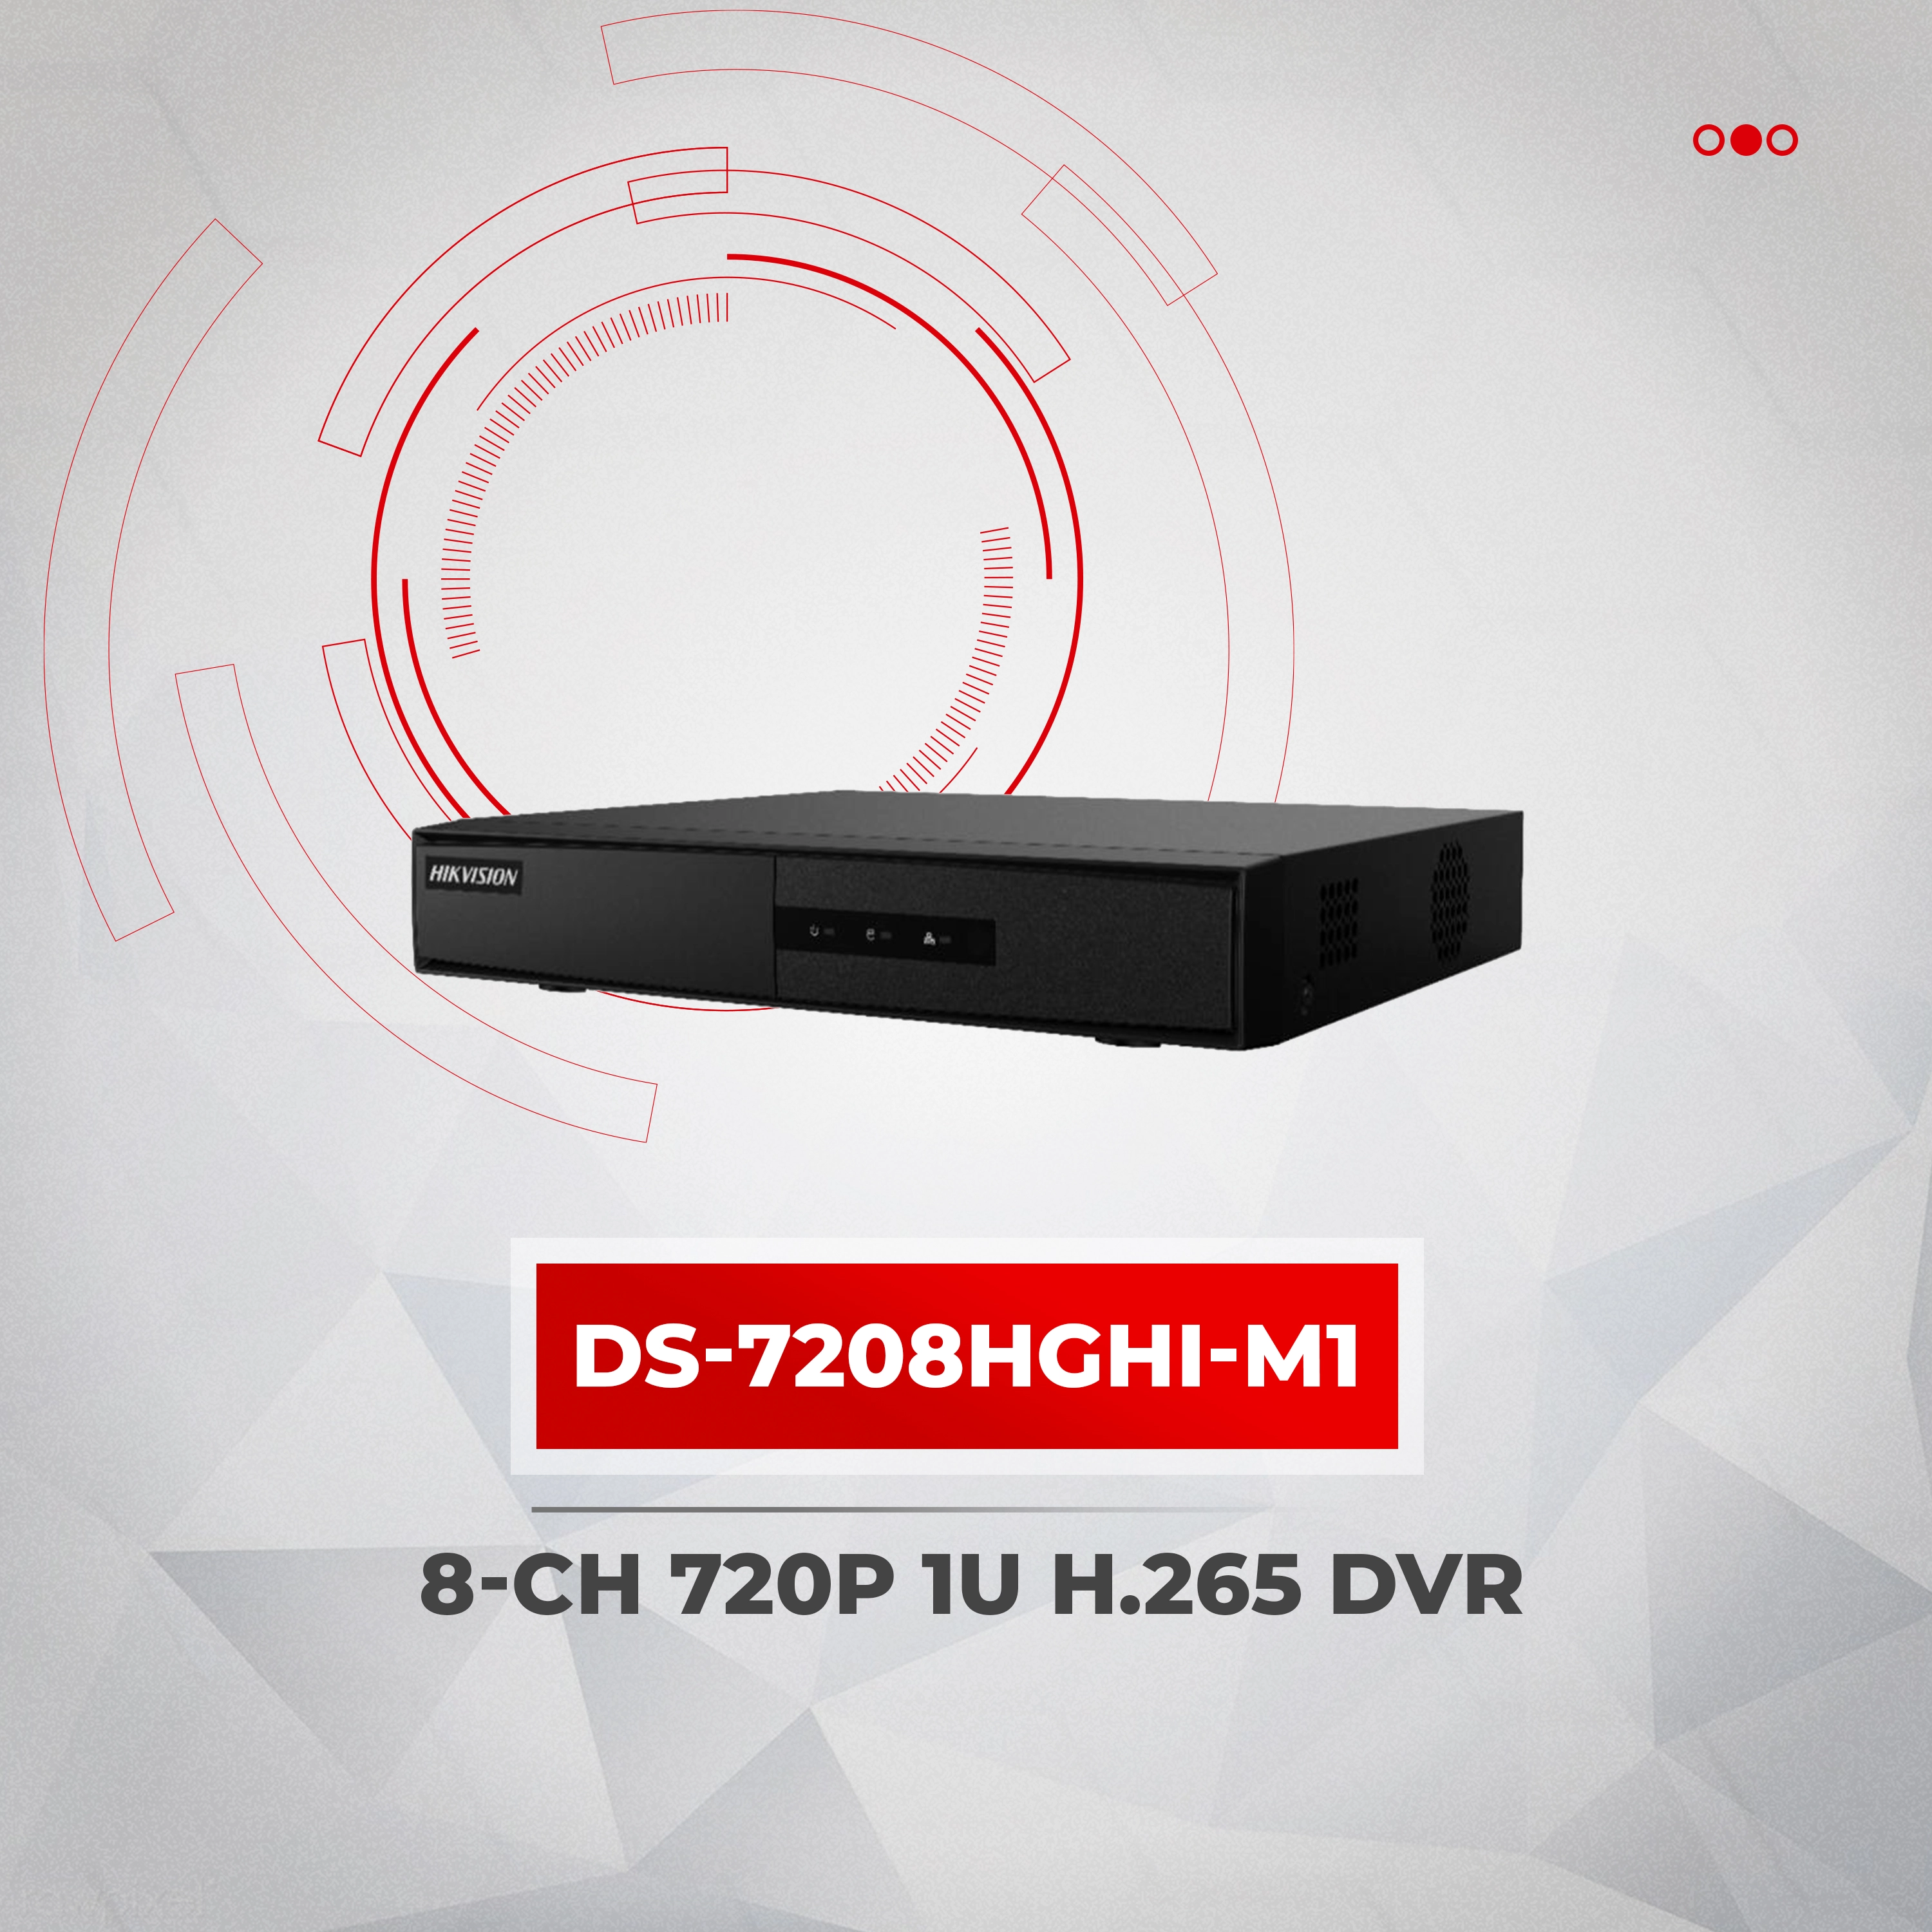 Hik-ds-8ch mini nvr for cctv security systems 